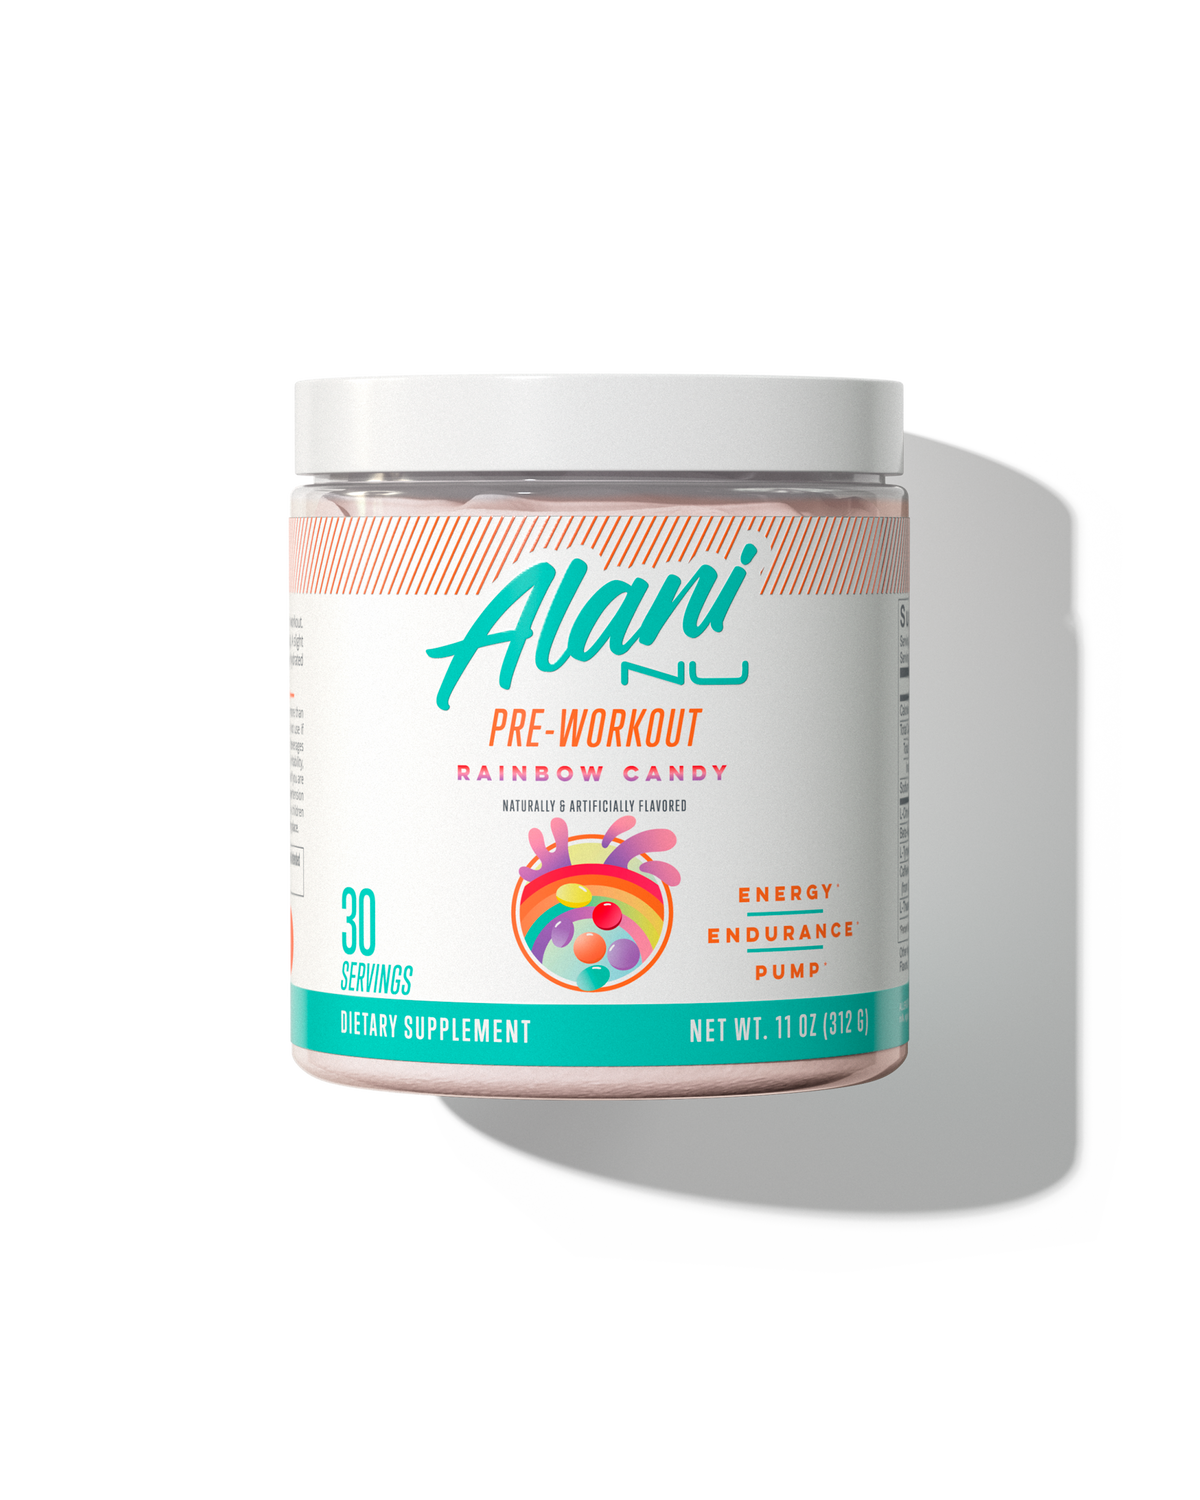 A 30 serving container of Pre-workout in Rainbow Candy flavor.